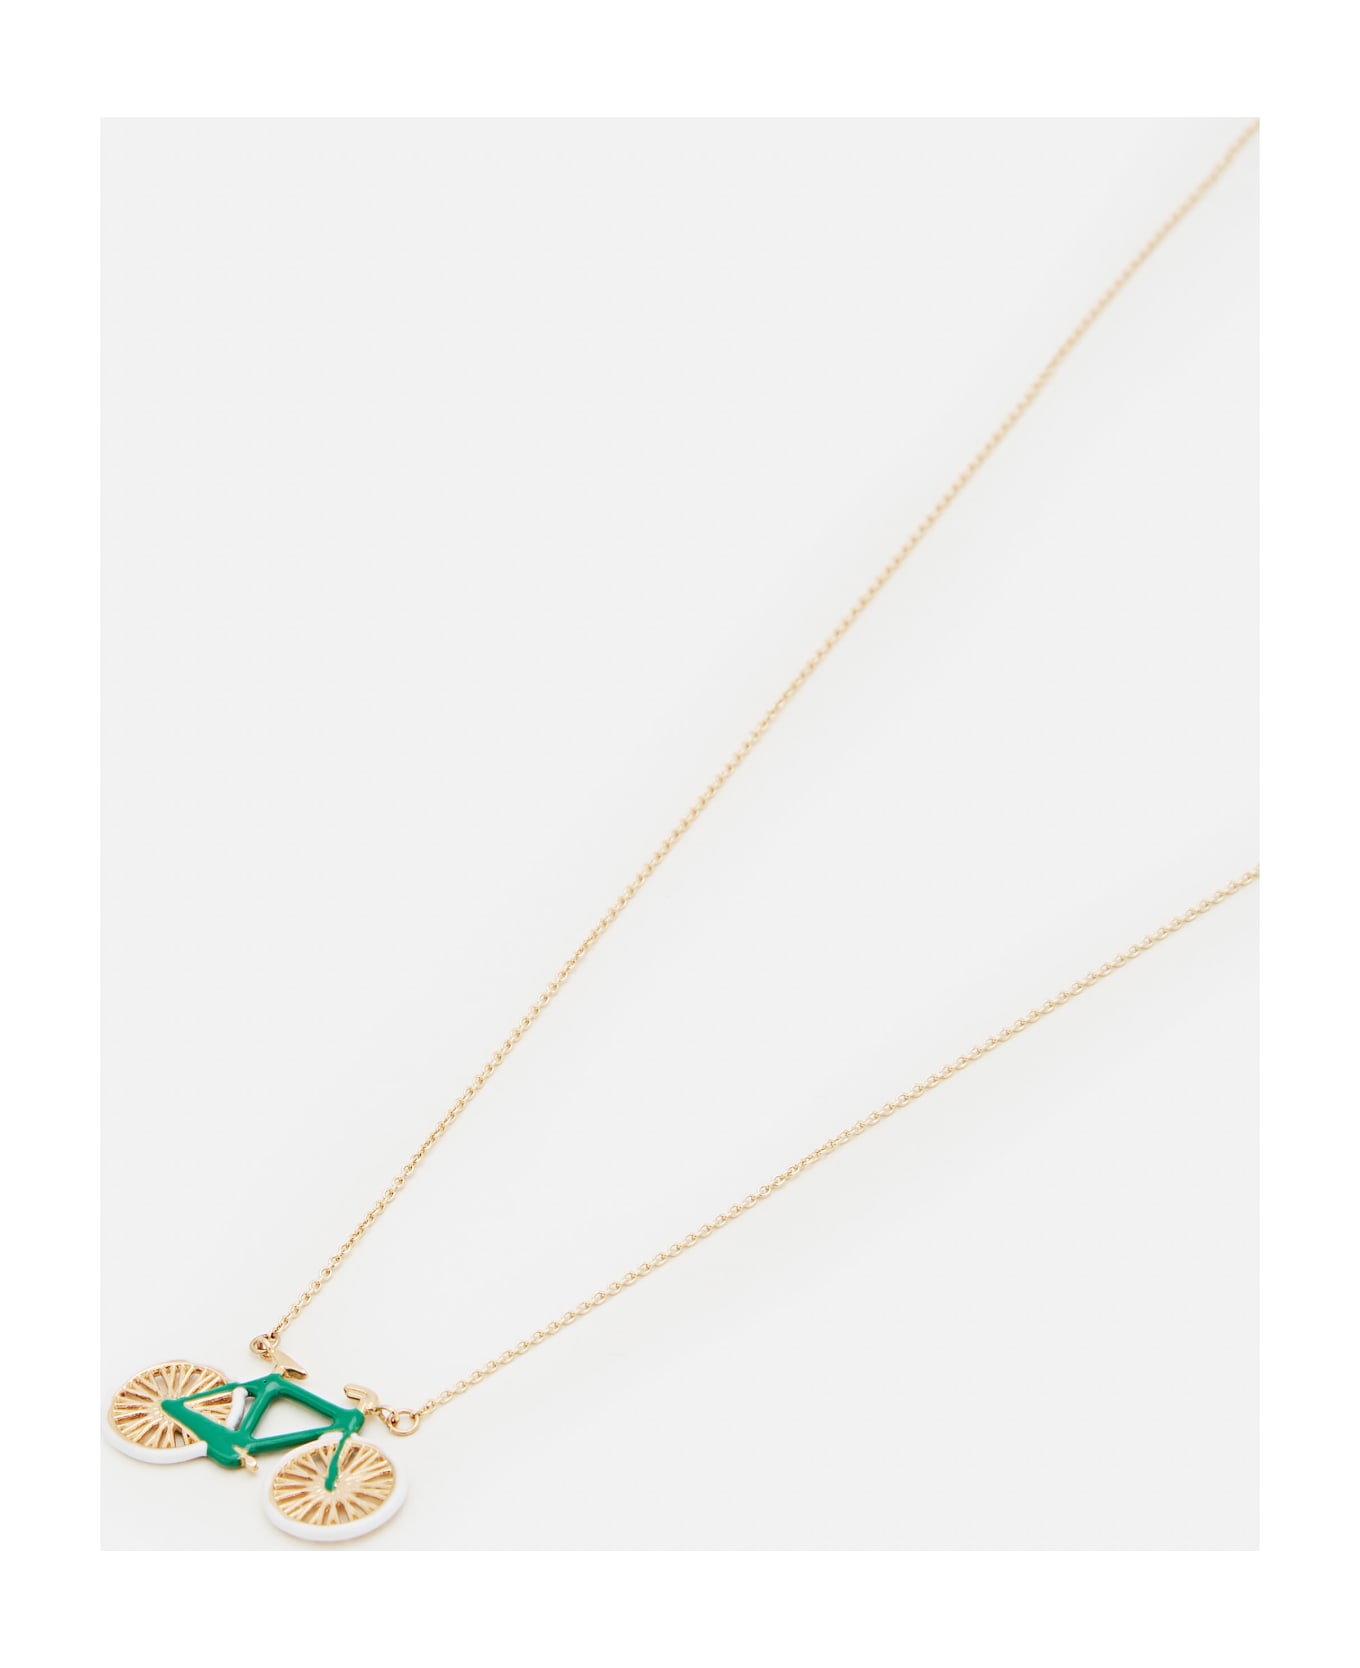 Aliita 9k Gold Bici Polished Necklace - Pistacchio Green+white/ ネックレス